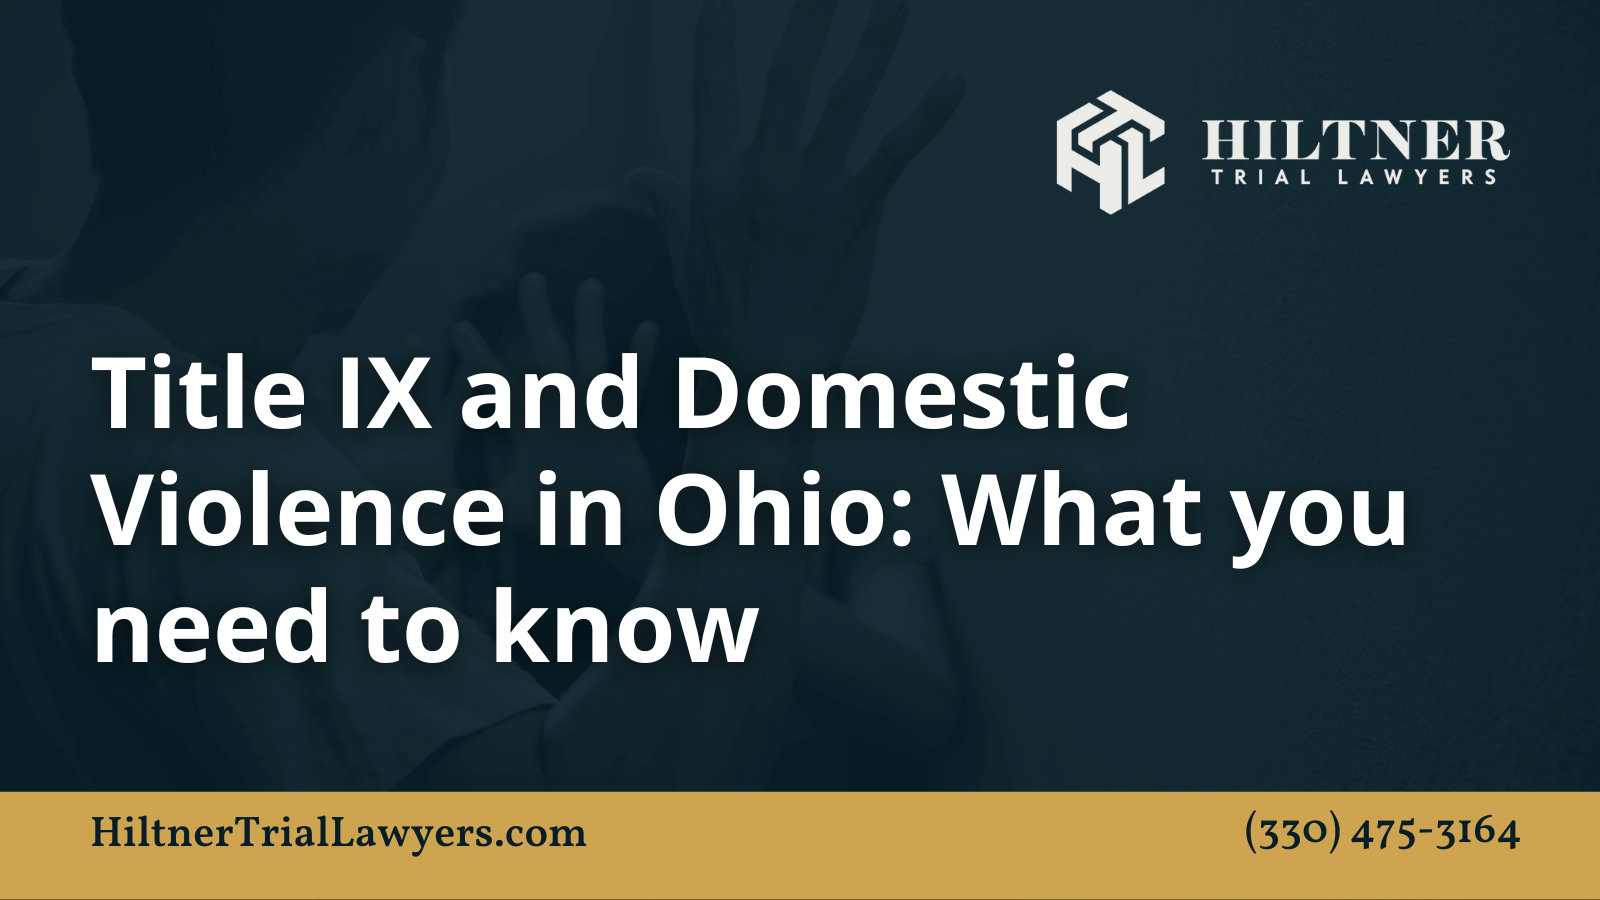 Title IX and Domestic Violence in Ohio: What you need to know - Hiltner Trial Lawyers Ohio - max hiltner